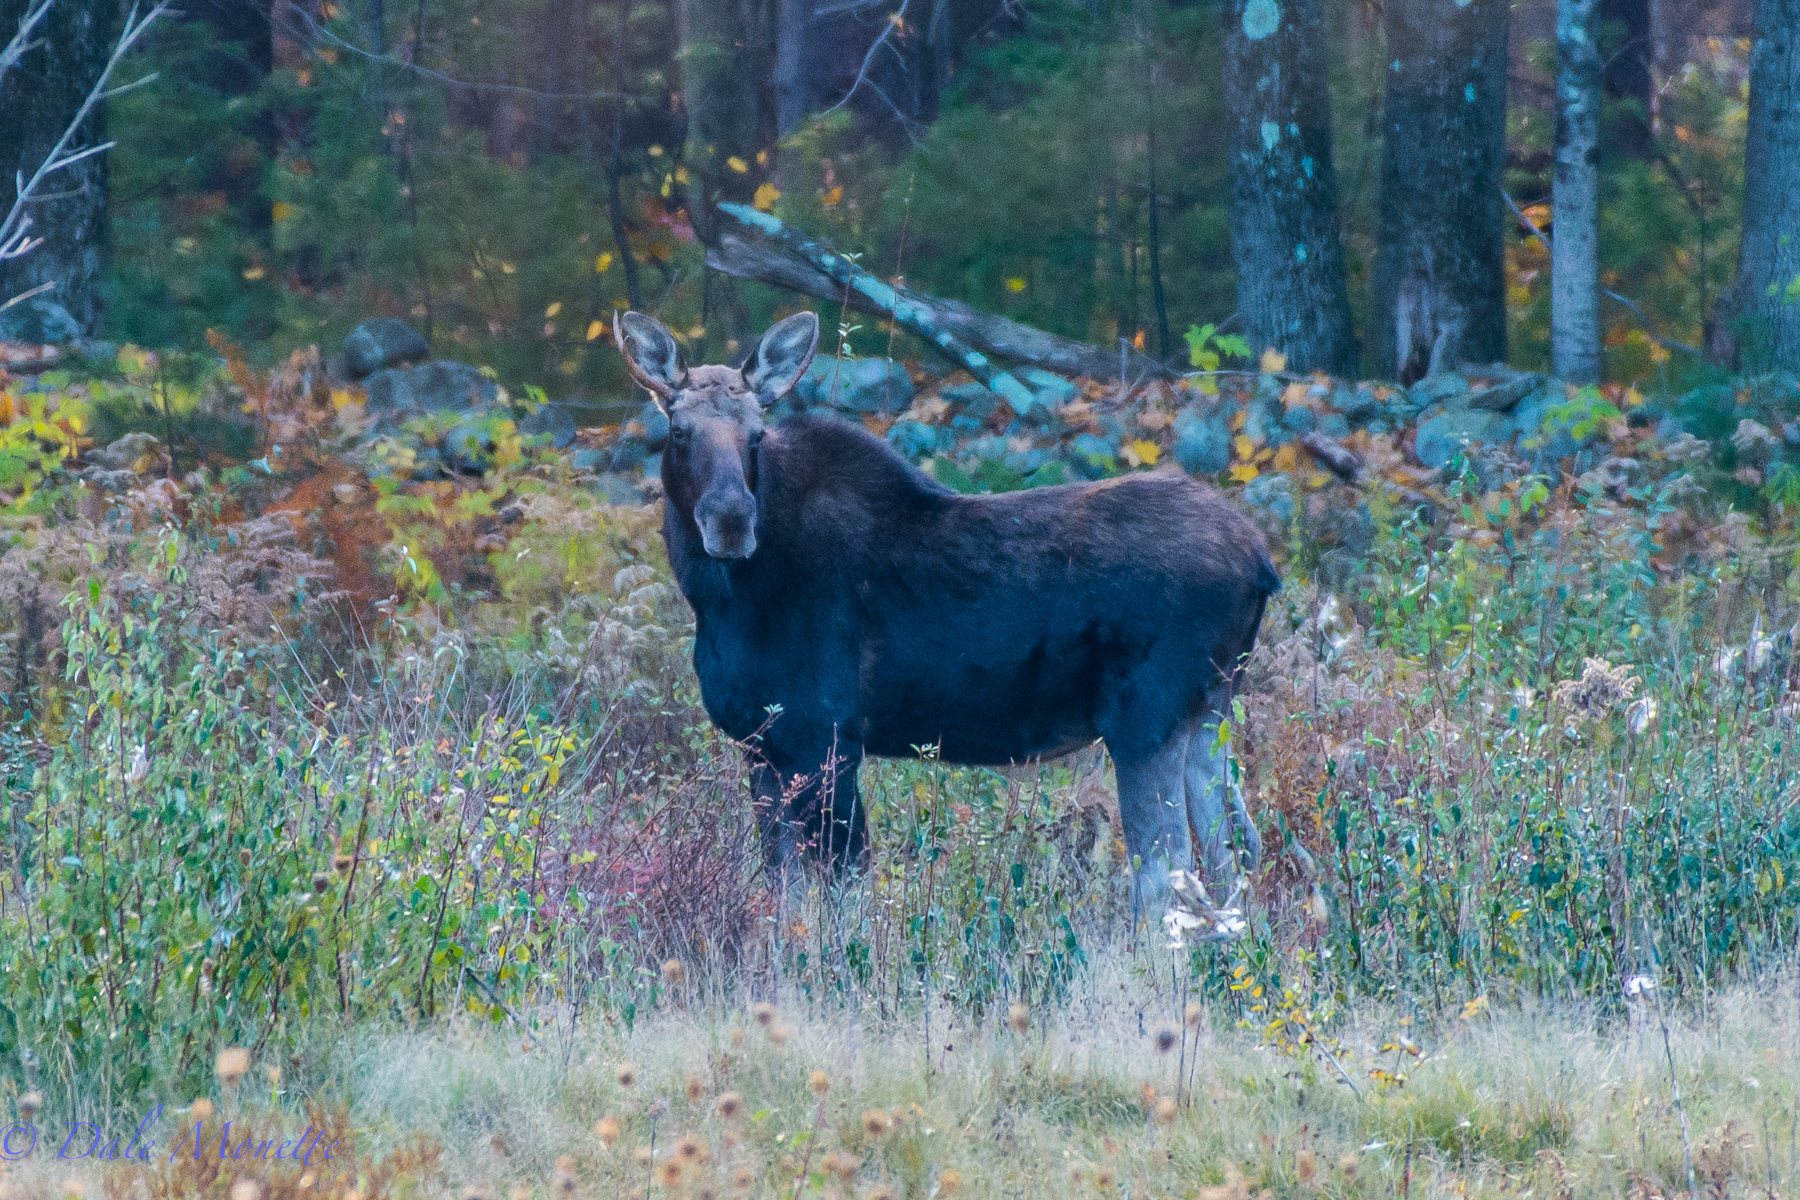 A spike horn bull moose. You have to look hard to see the antlers.